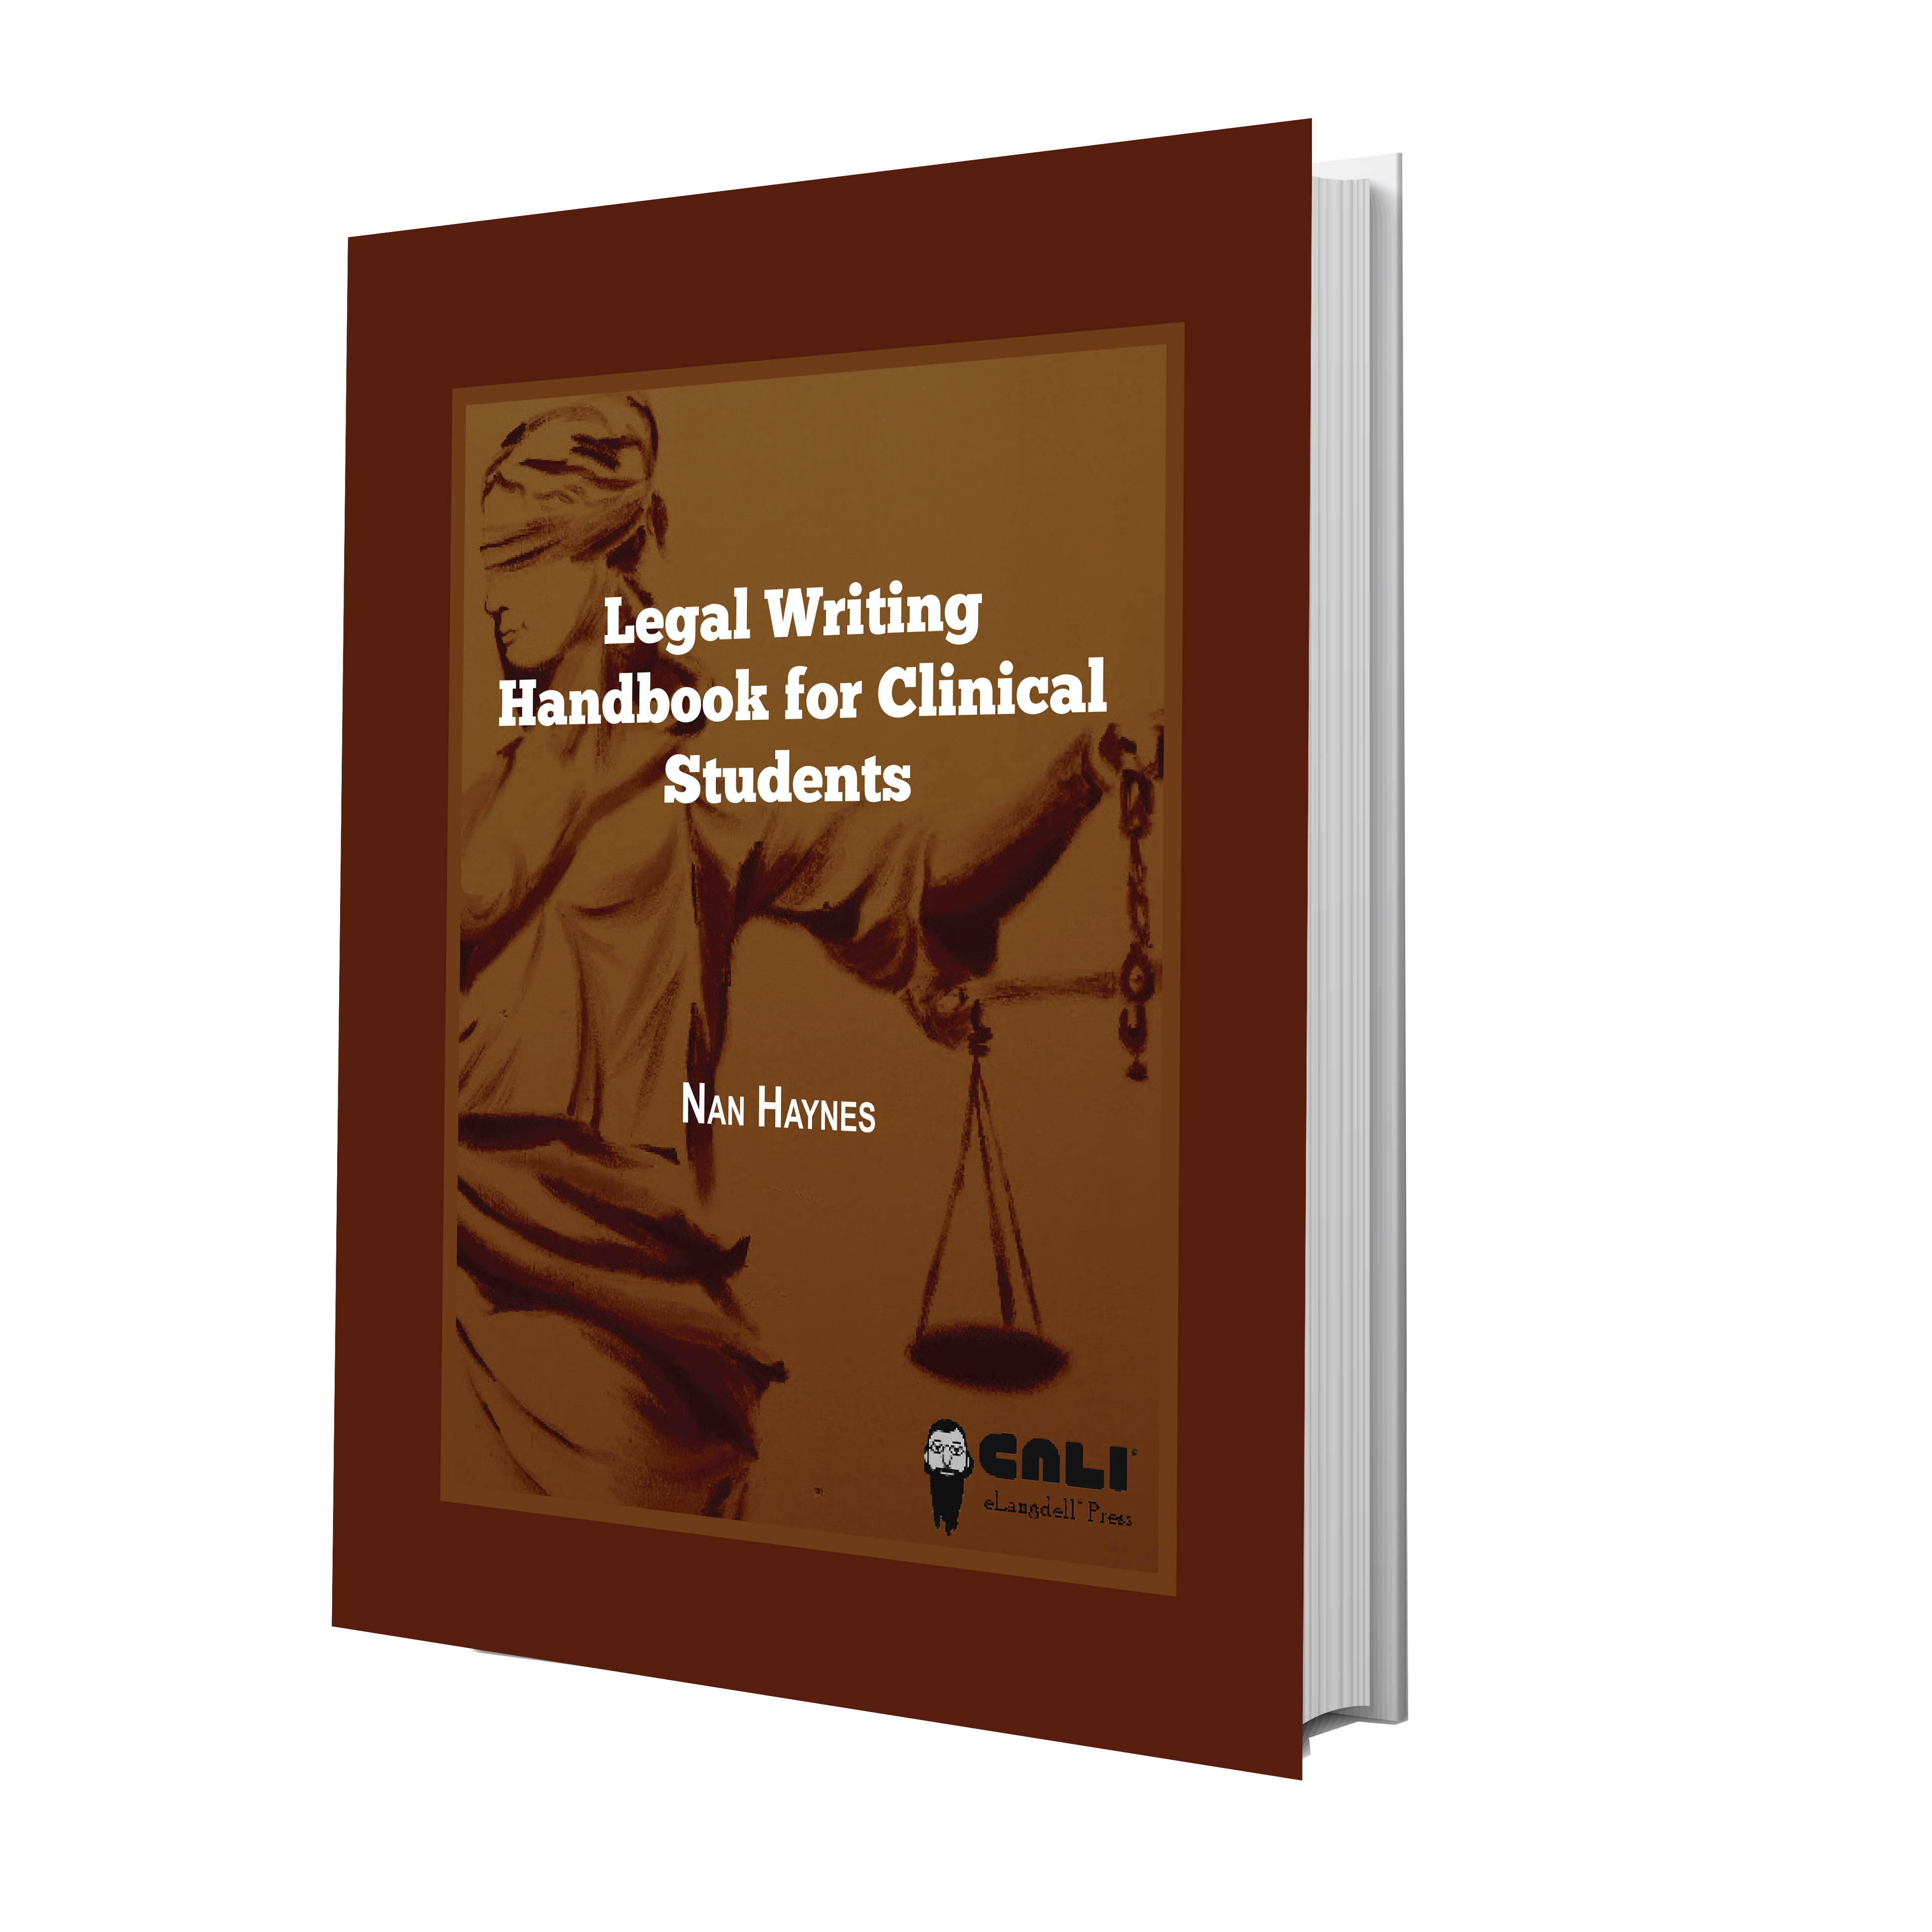 Legal Writing Handbook for Clinical Students casebook cover